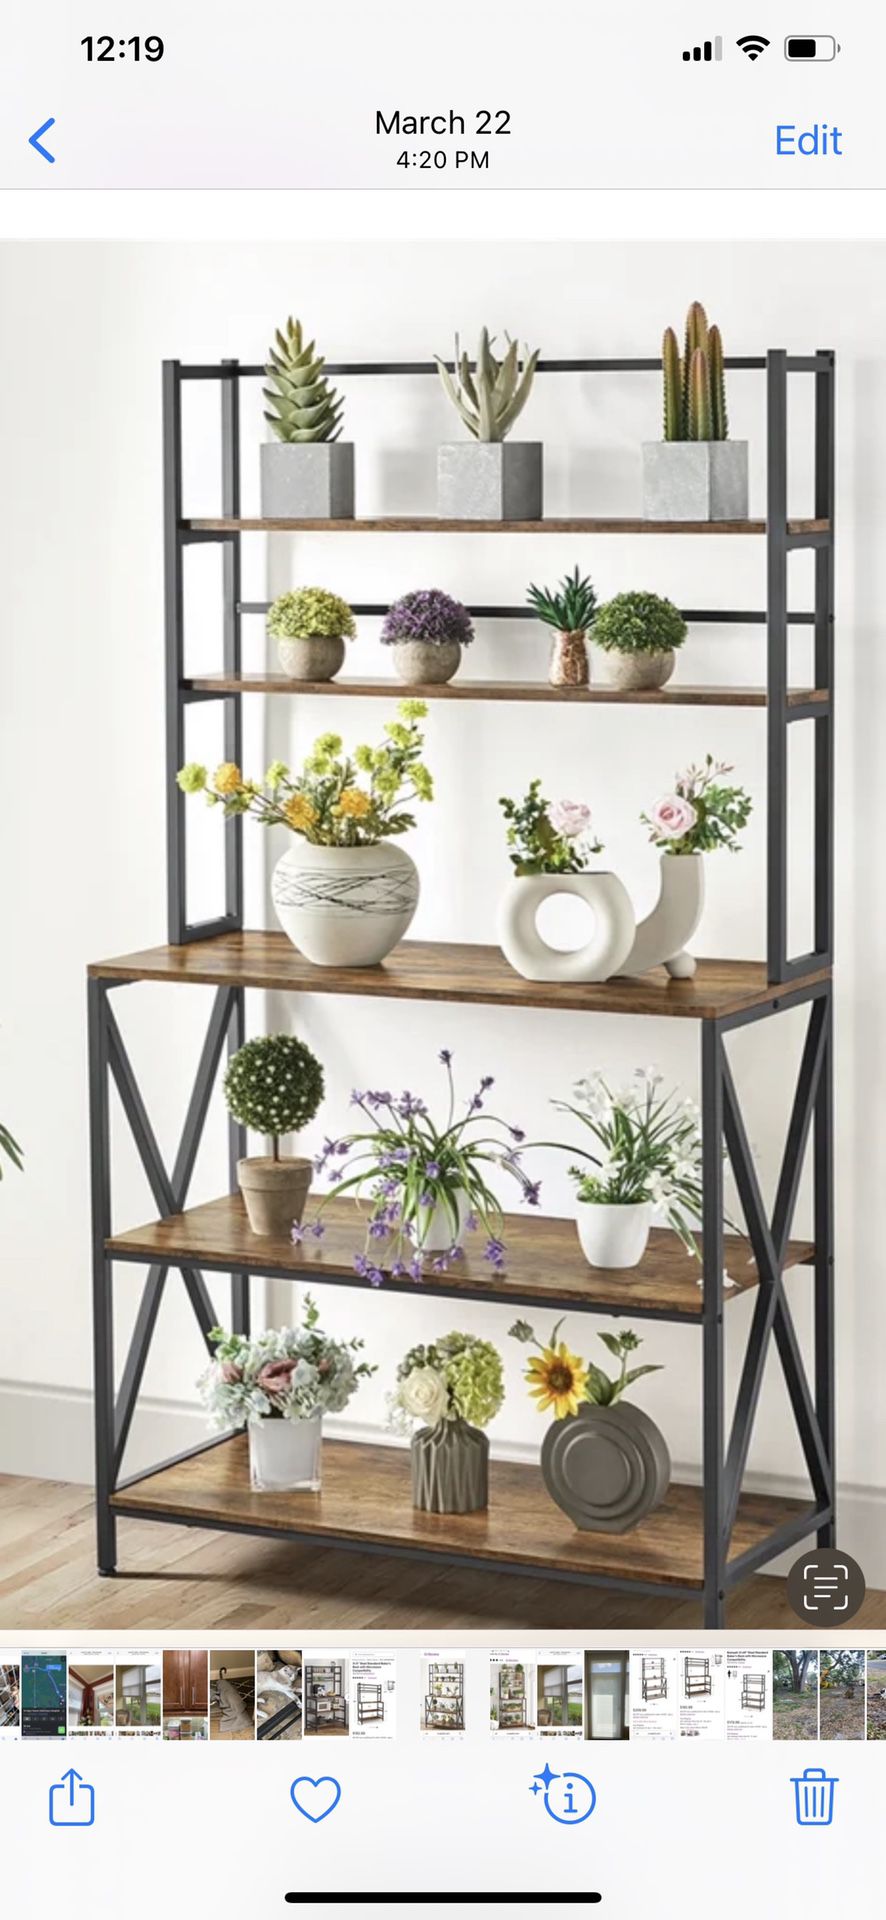 REDUCED TO SELL!! Brand New Versatile Shelves